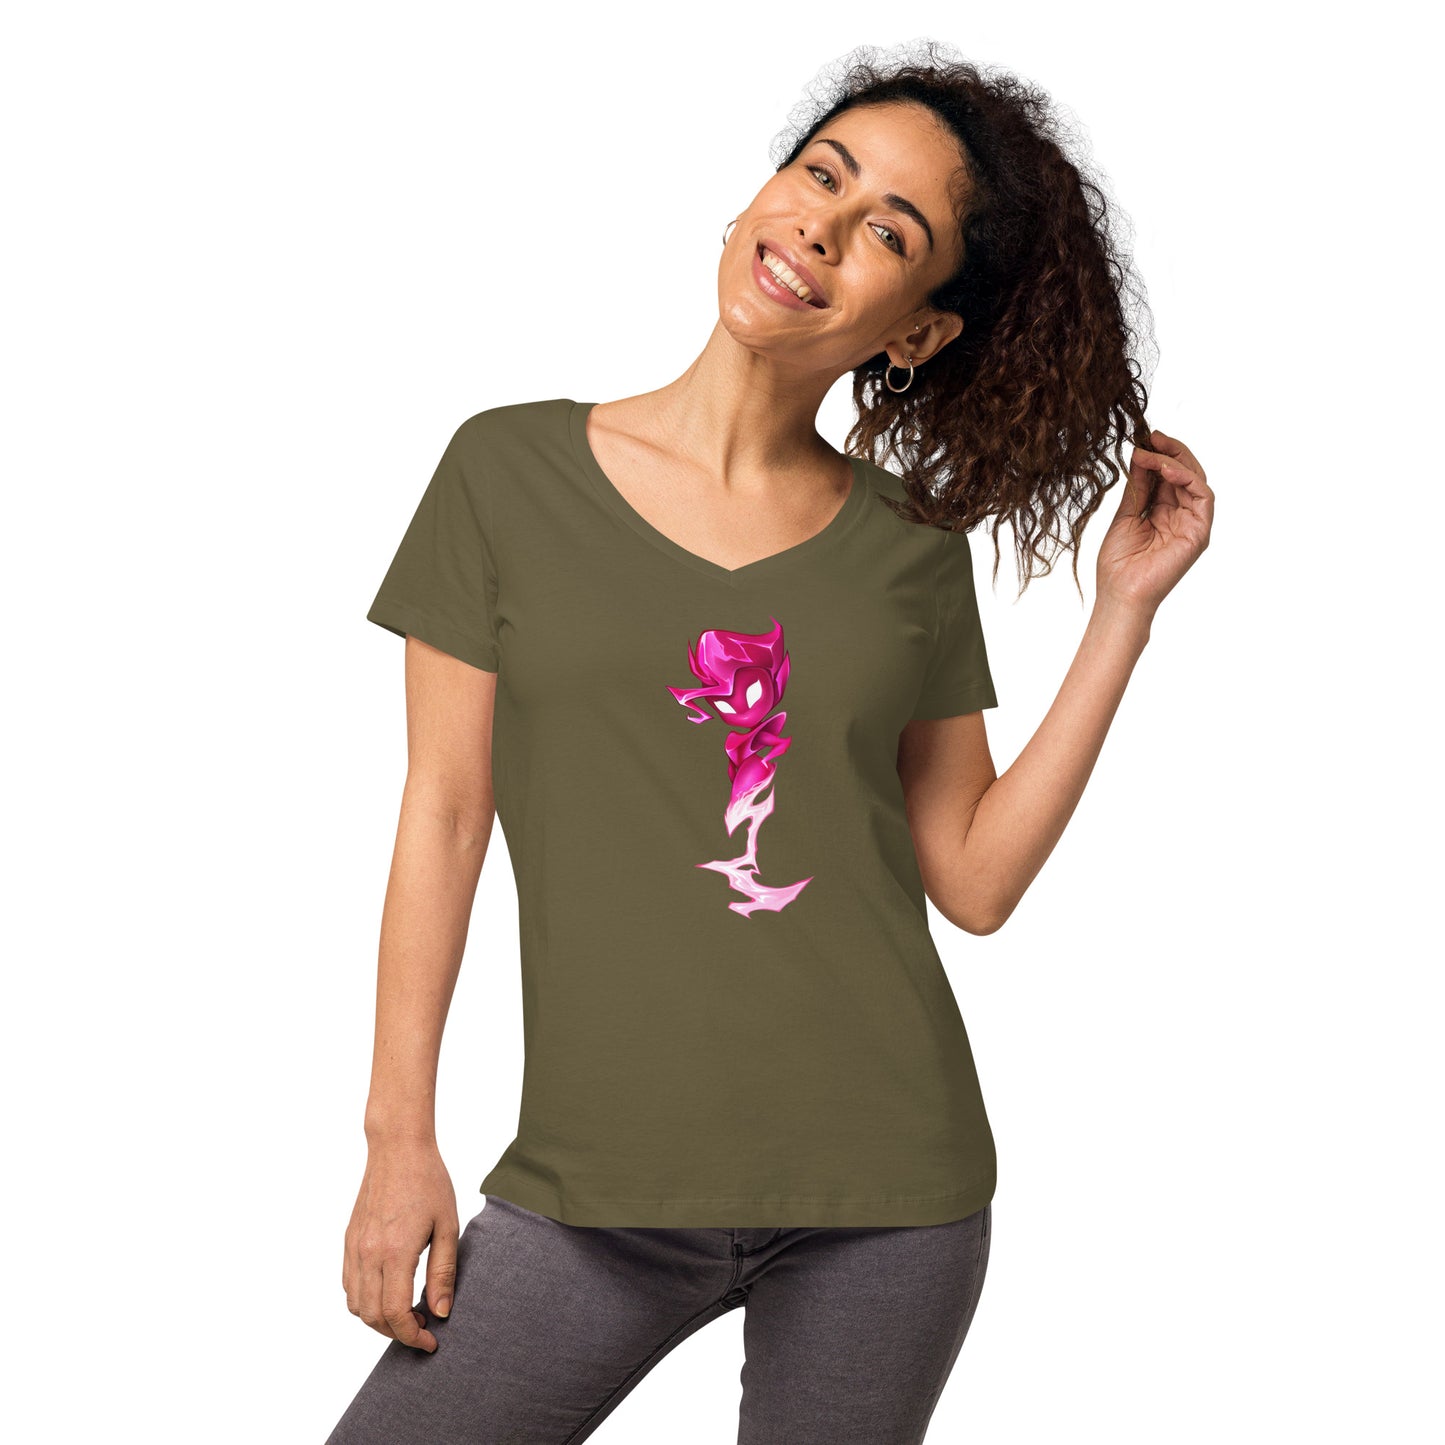 Women’s fitted v-neck t-shirt: Joules